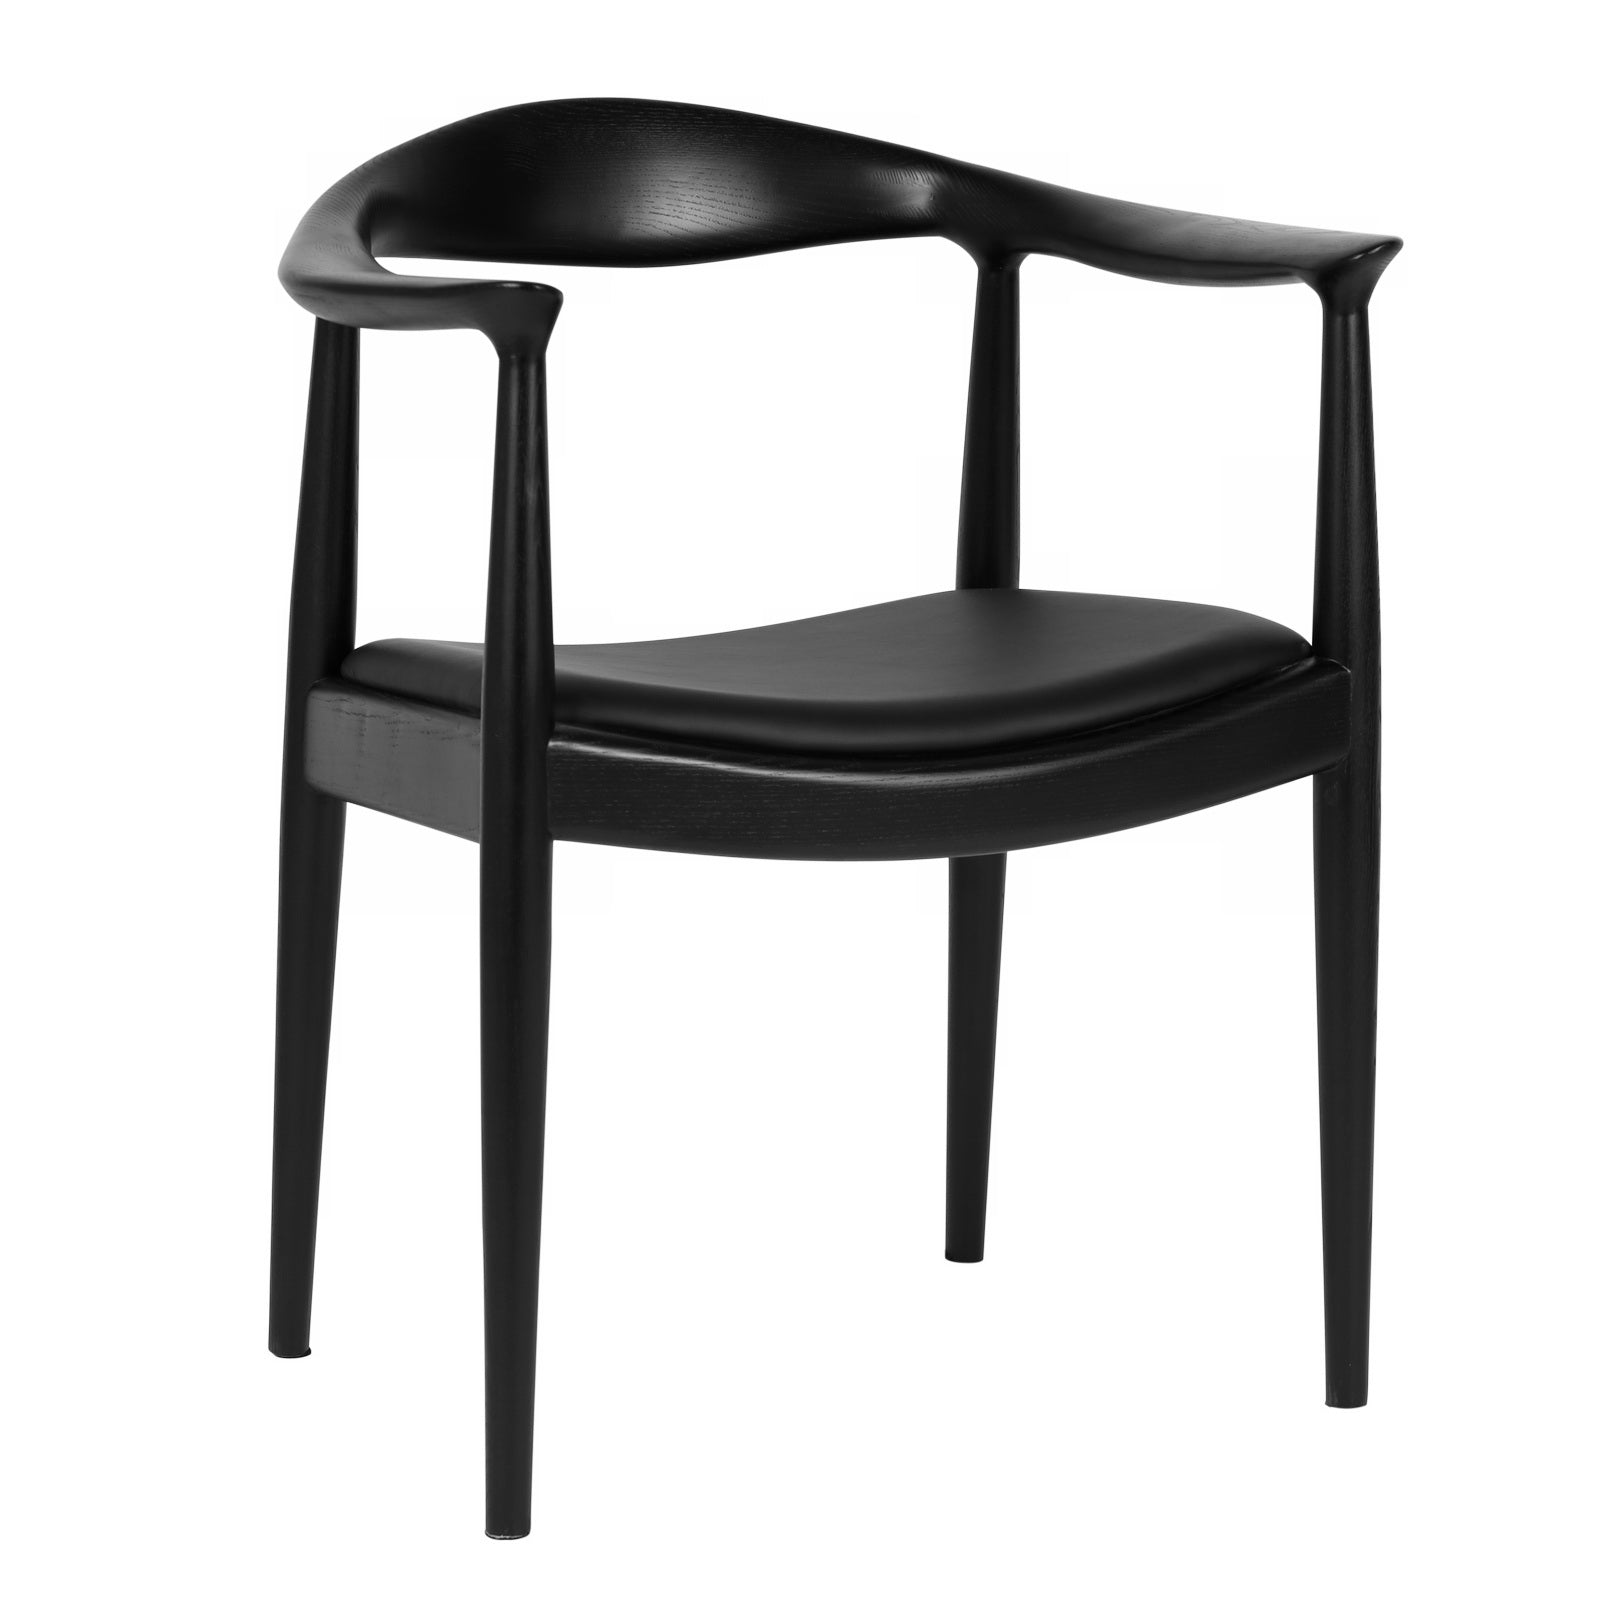 Natural Wood Officeworks  Hans Wegner Kennedy Chair Leather Seat-Black